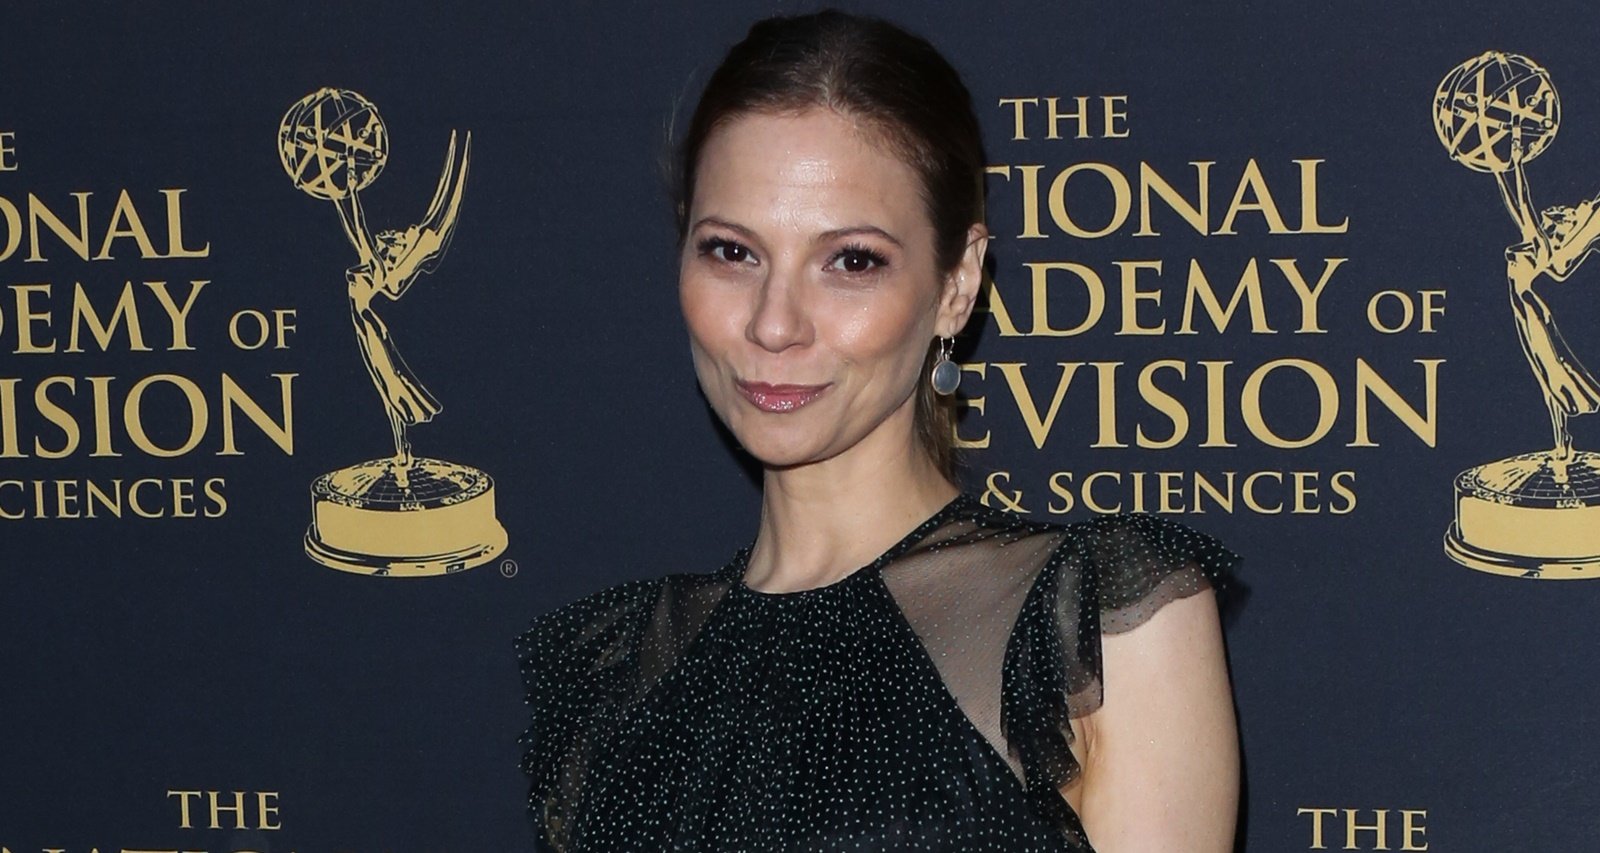 Daytime Soaps Comings and Goings for October 21 to 27: Tamara Braun’s Rumored Exit from “GH” Has Fans Antsy